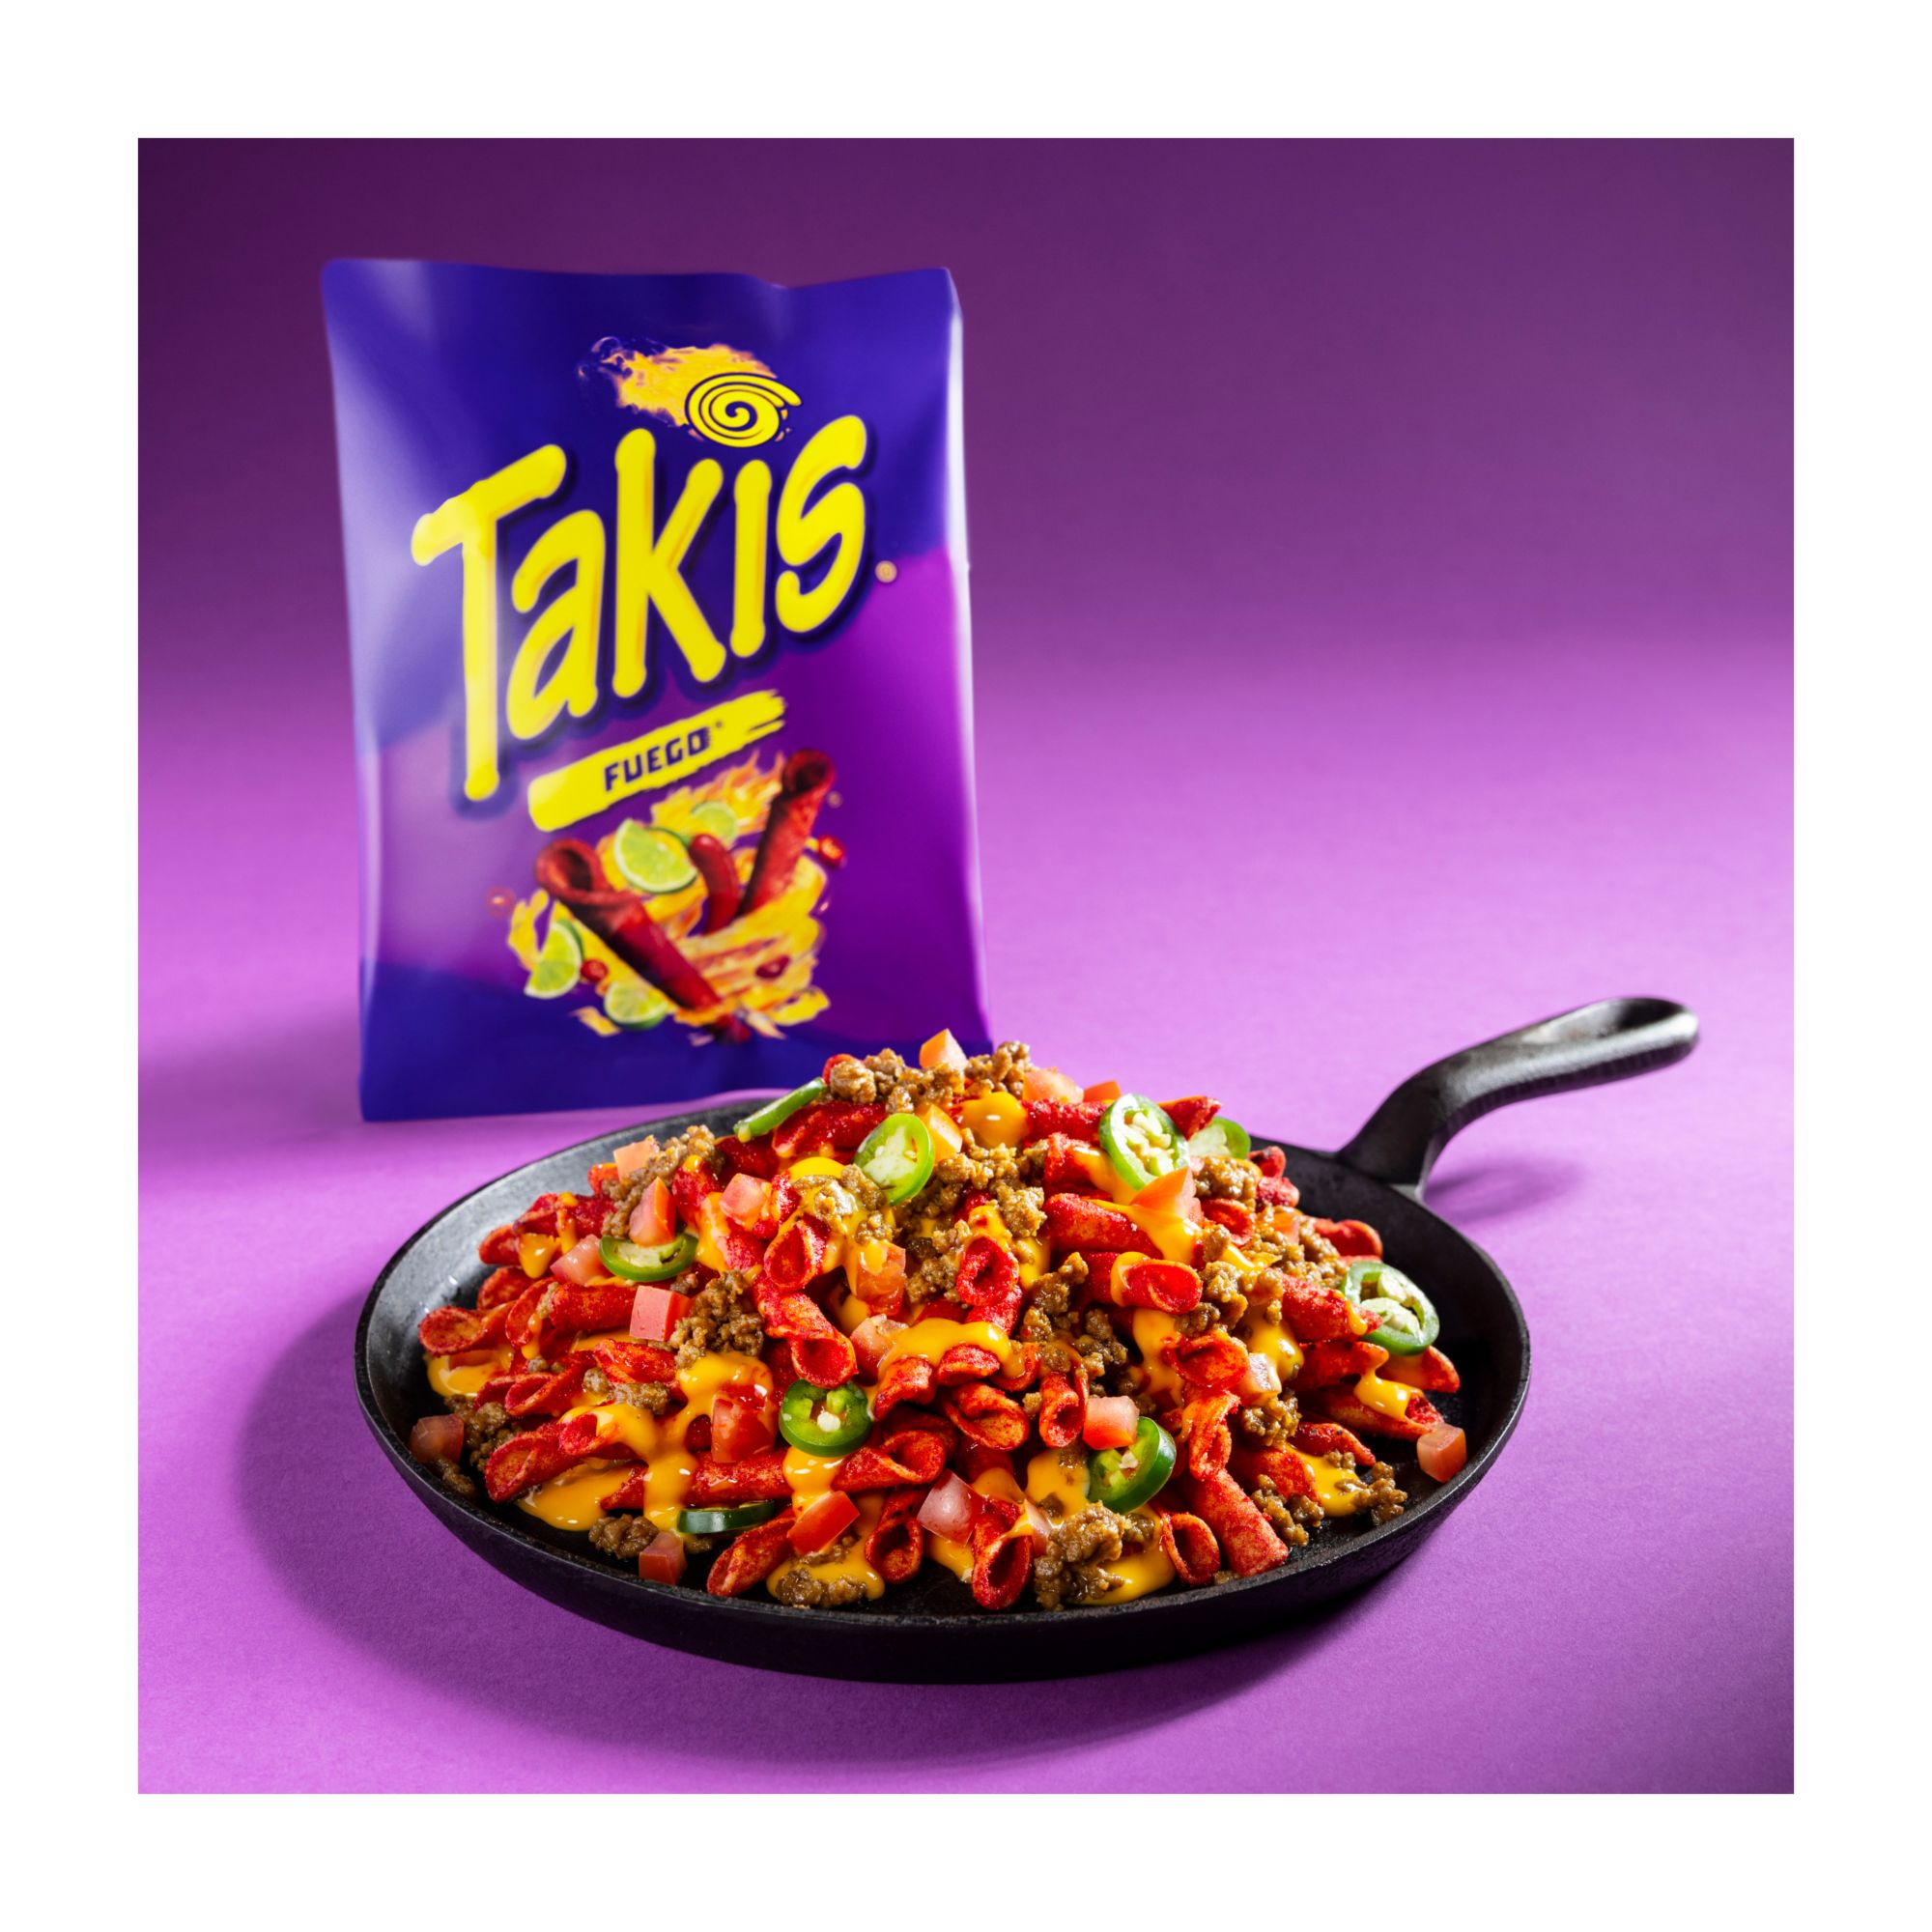 Takis Fuego Hot Chili Pepper & Lime Flavored Rolled Tortilla Minis